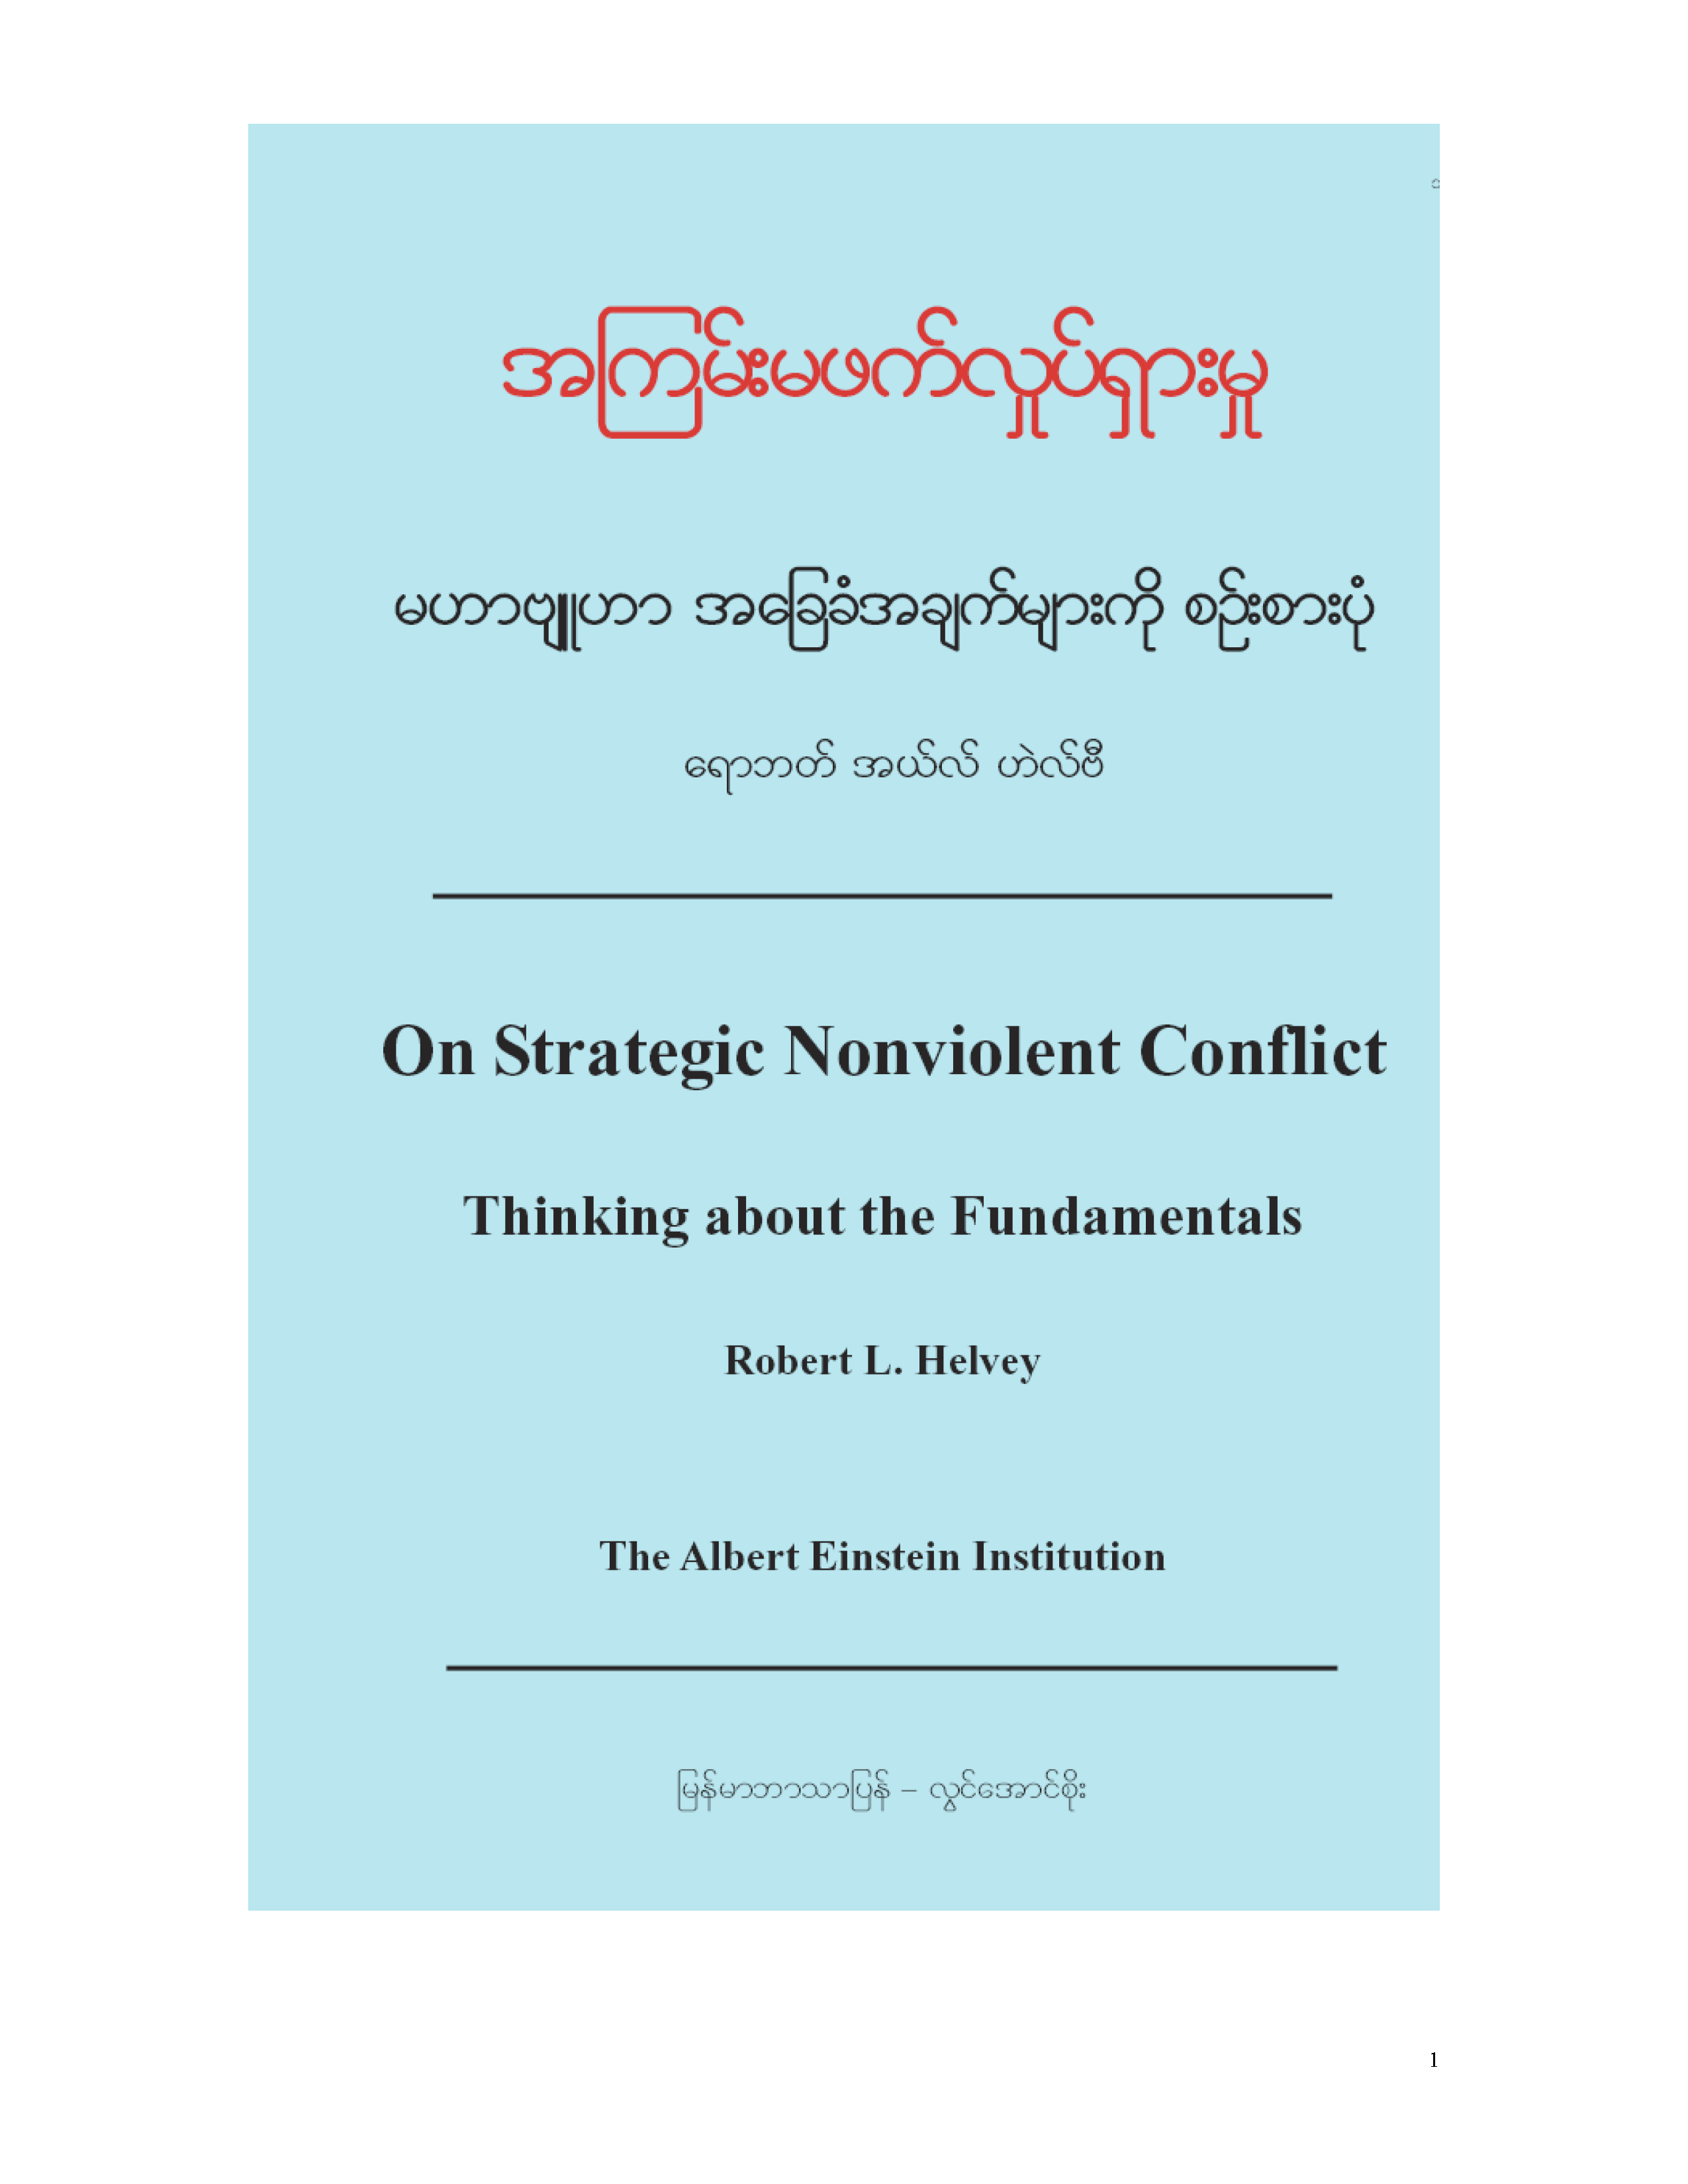 On Strategic Nonviolent Conflict: Thinking about the Fundamentals (Burmese)